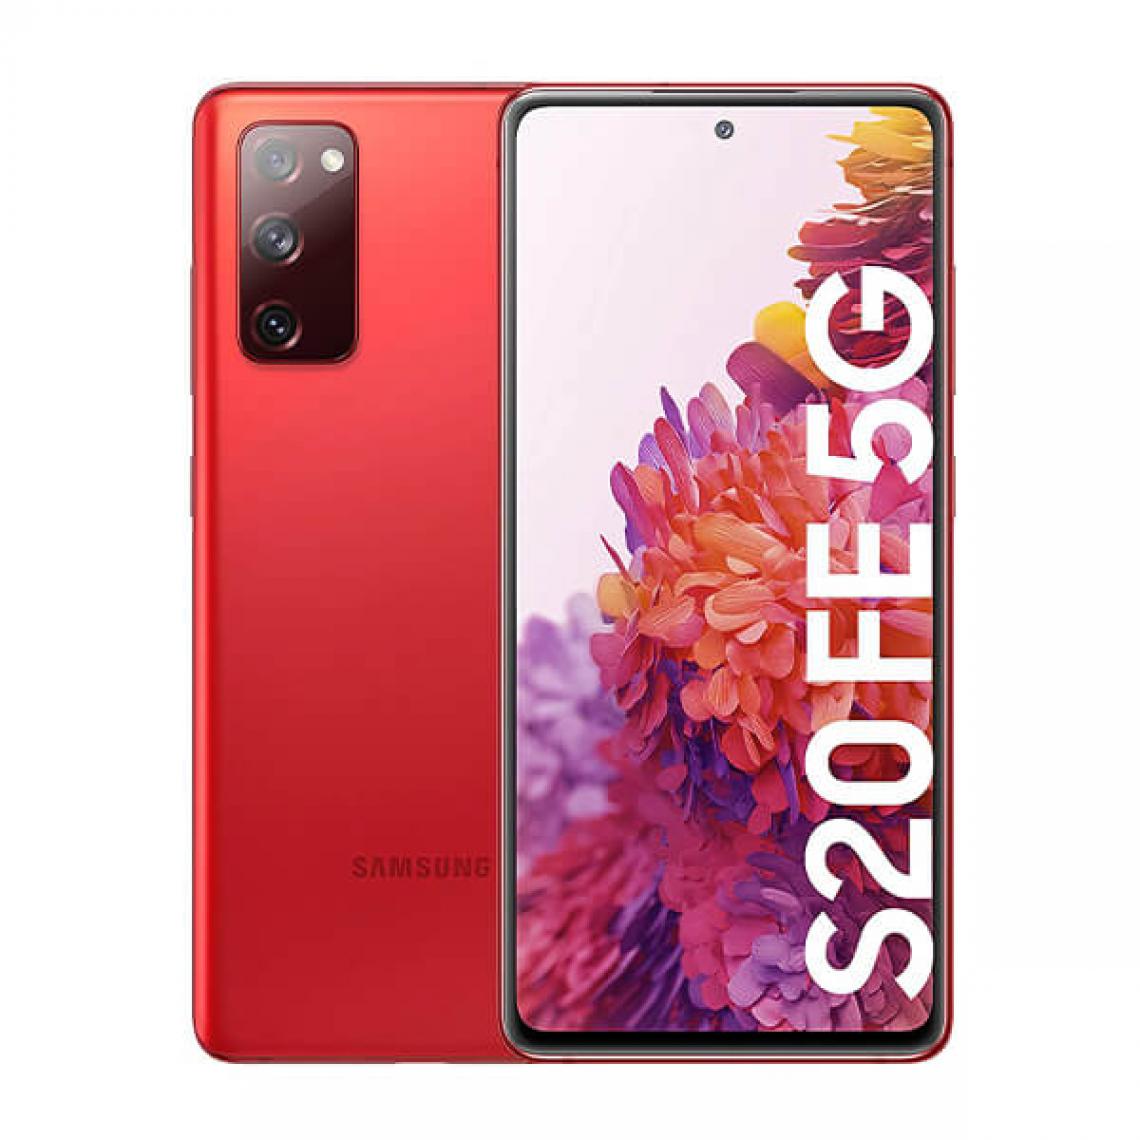 Samsung - Samsung Galaxy S20 FE 5G 6Go/128Go Rouge (Cloud Red) Dual SIM G781B - Smartphone Android